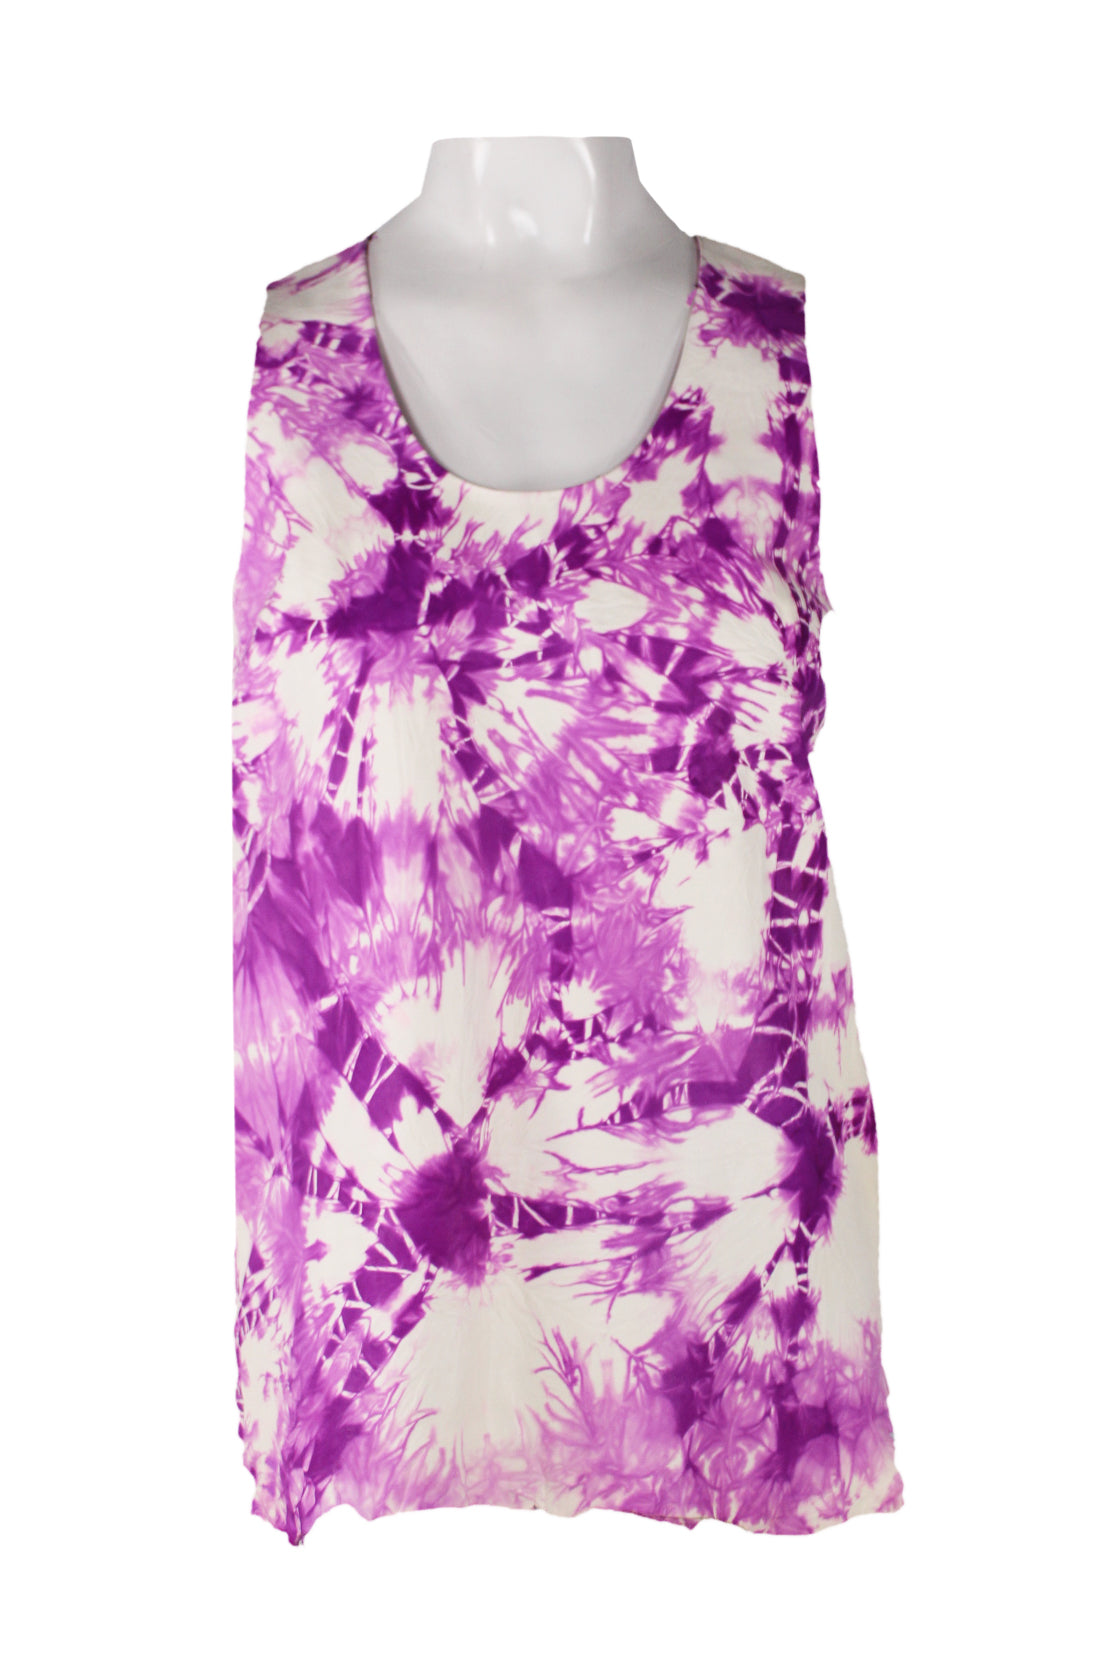 alexander wang white and pink tie dye leather tank top.